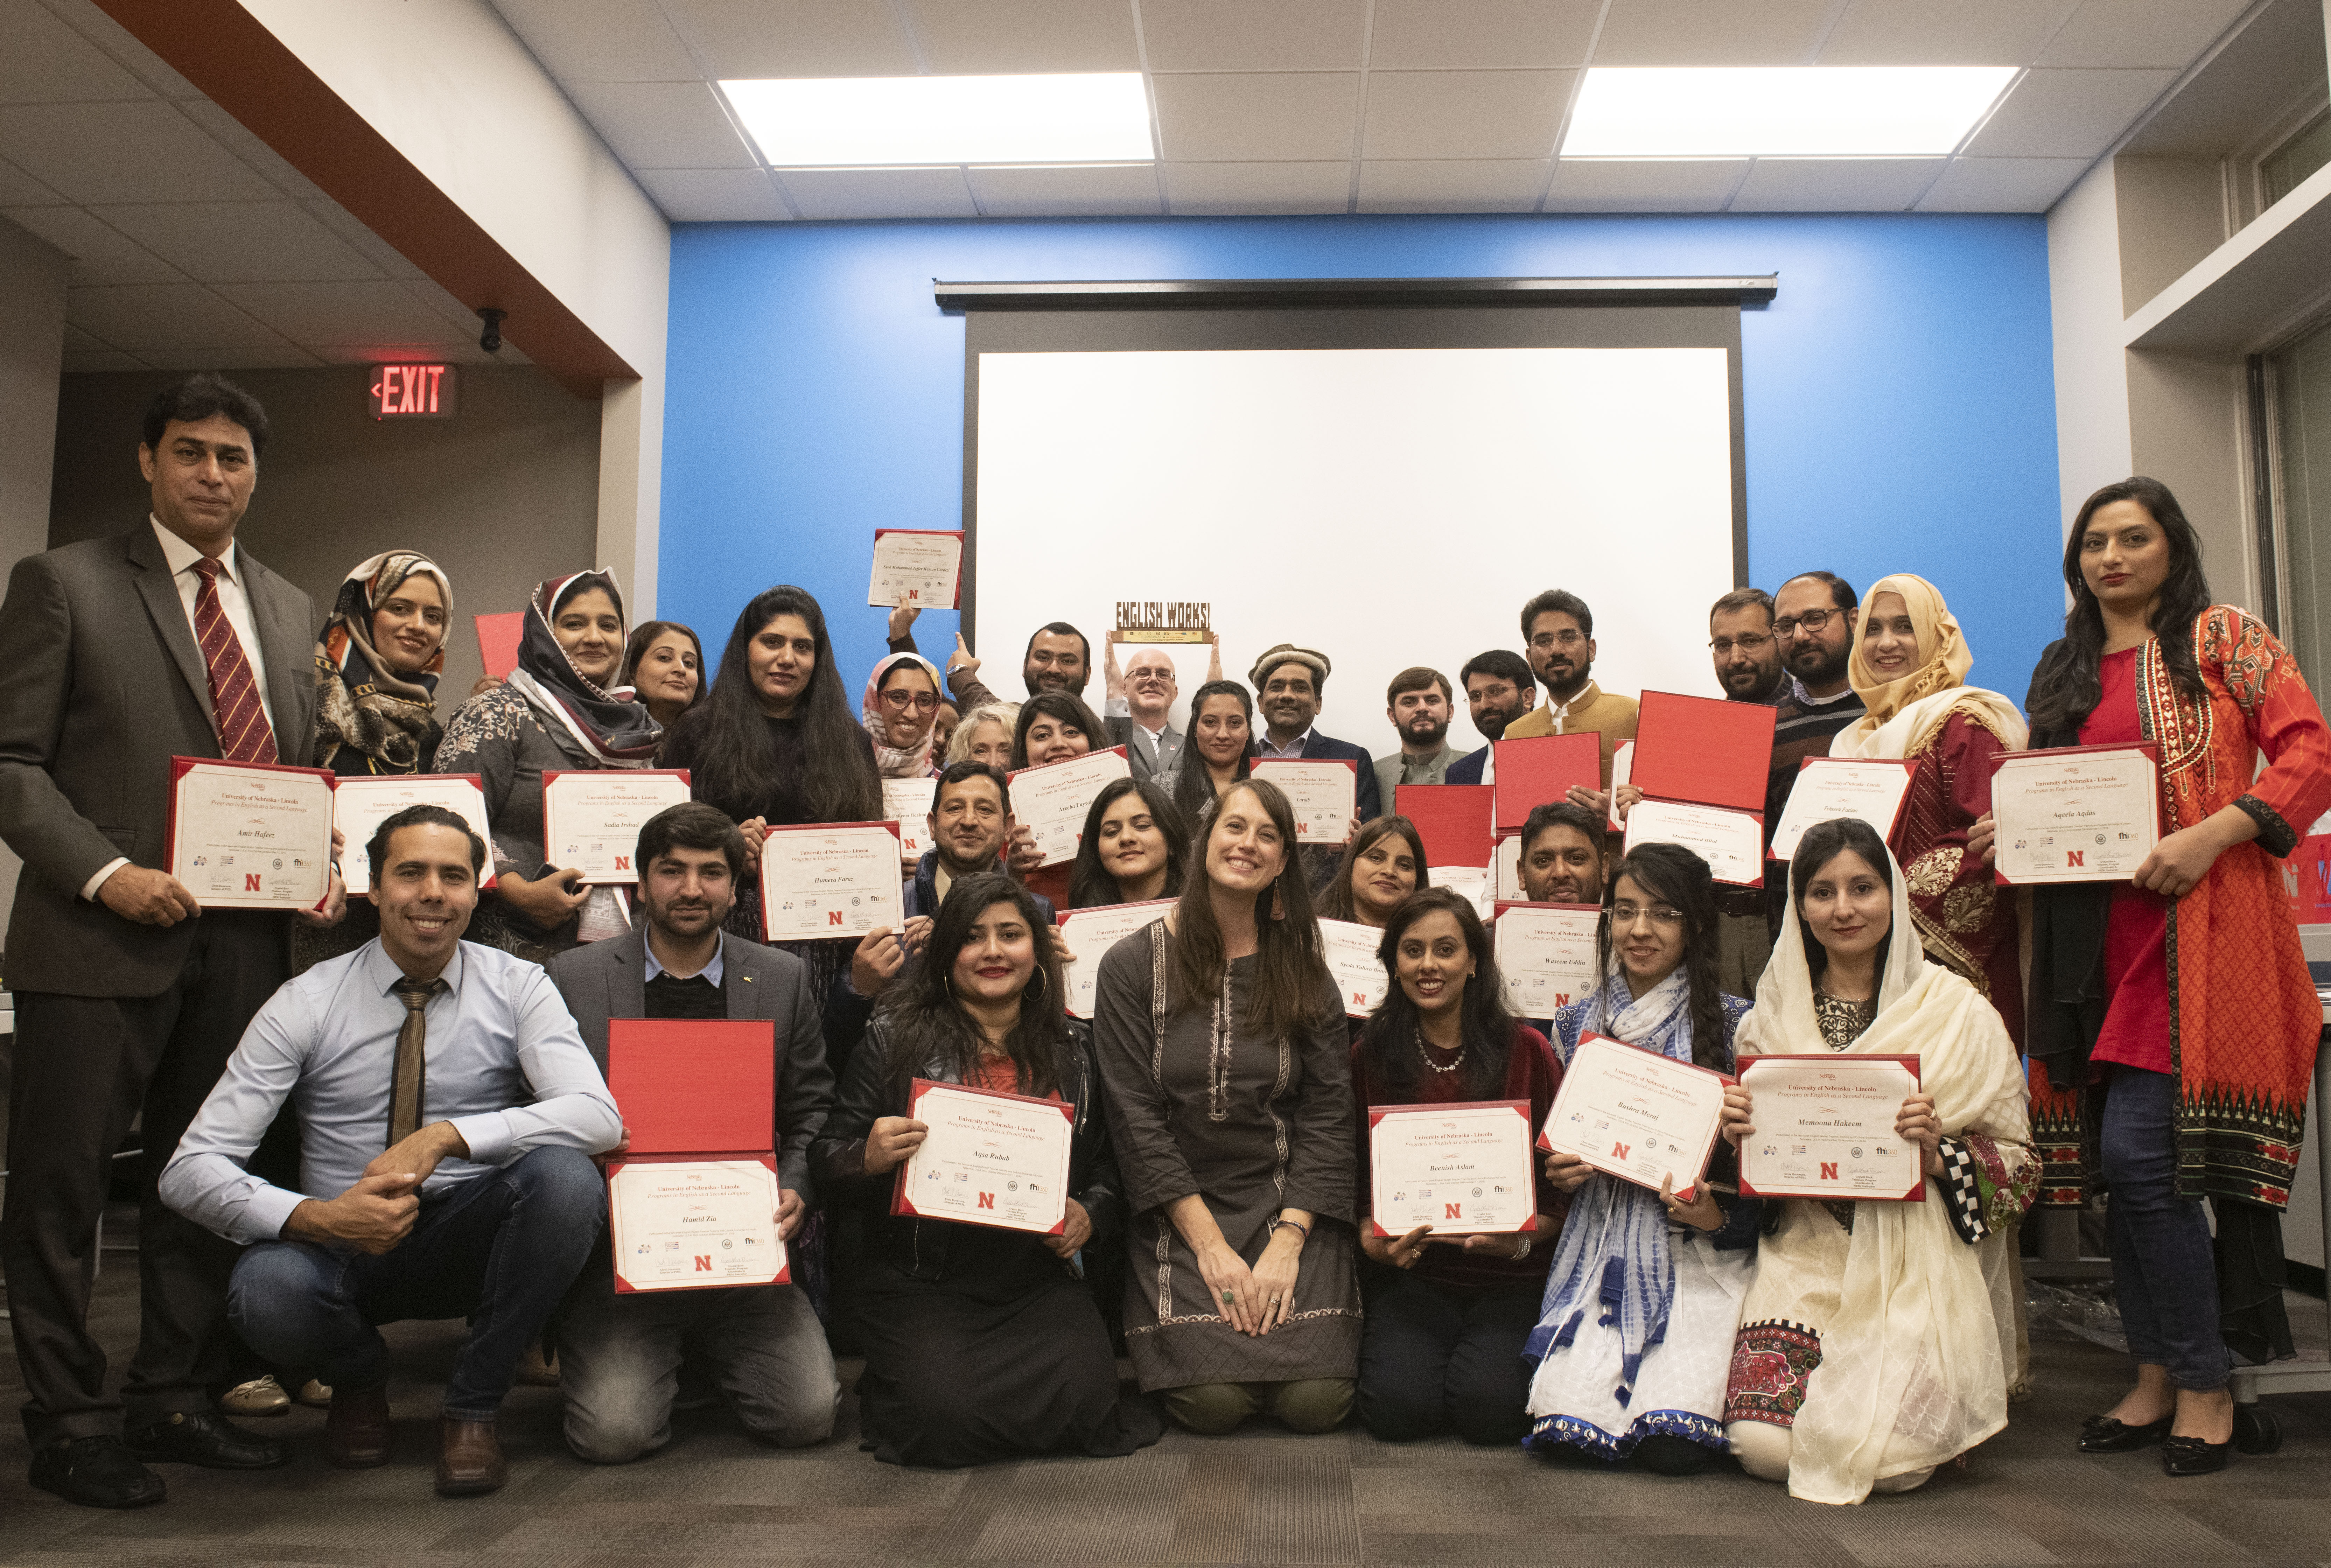 The Pakistani scholars from Nebraska’s English Works! Program celebrate the completion of their two-week program at UNL.